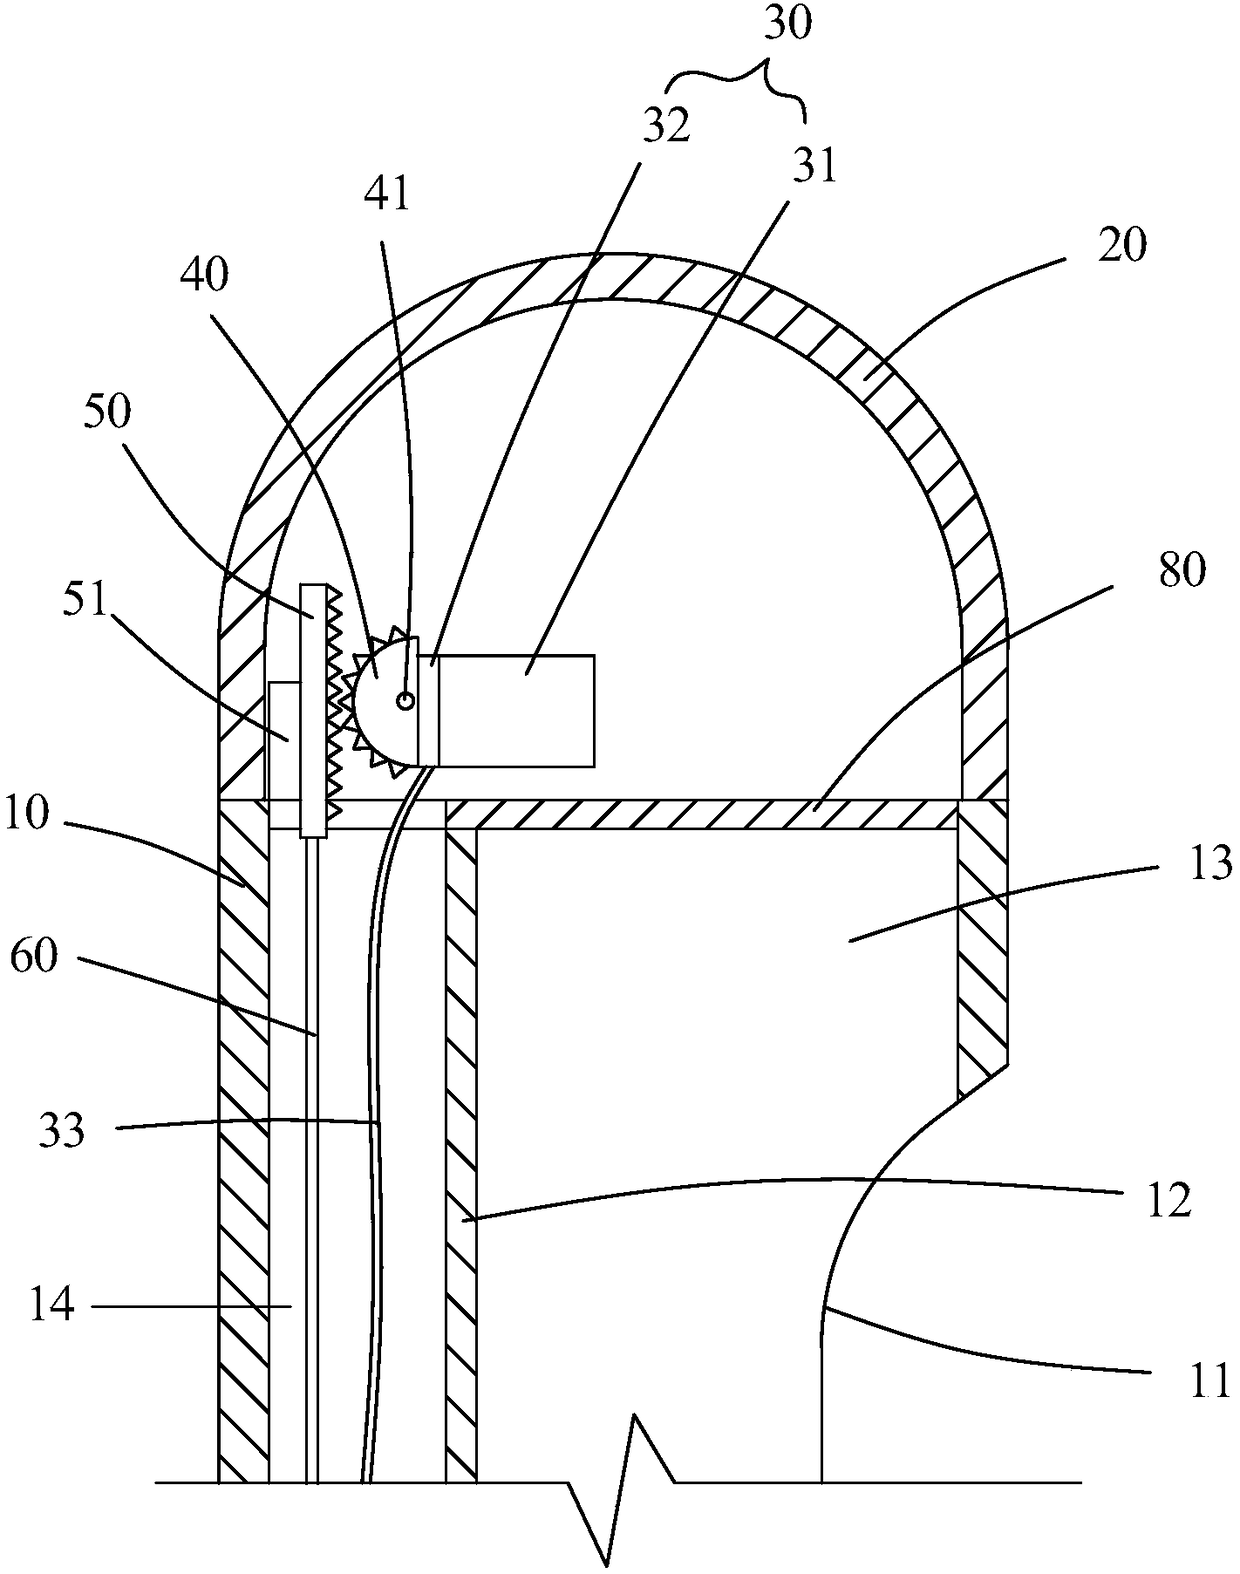 Visual induced abortion device with variable viewing direction angle